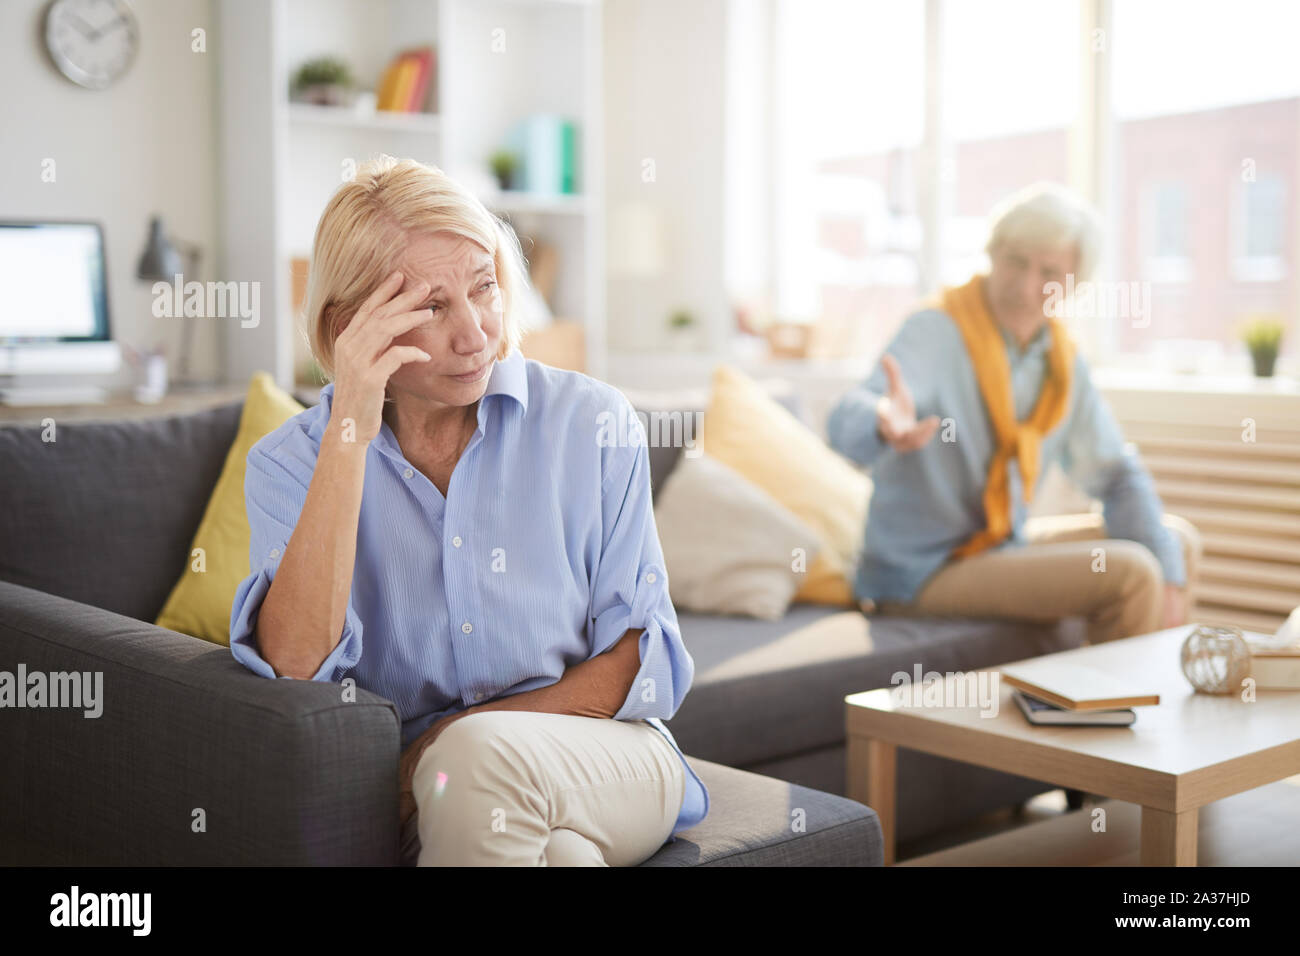 Portrait of senior couple fighting sitting on opposite sides of sofa at home, focus on crying wife in foreground, copy space Stock Photo